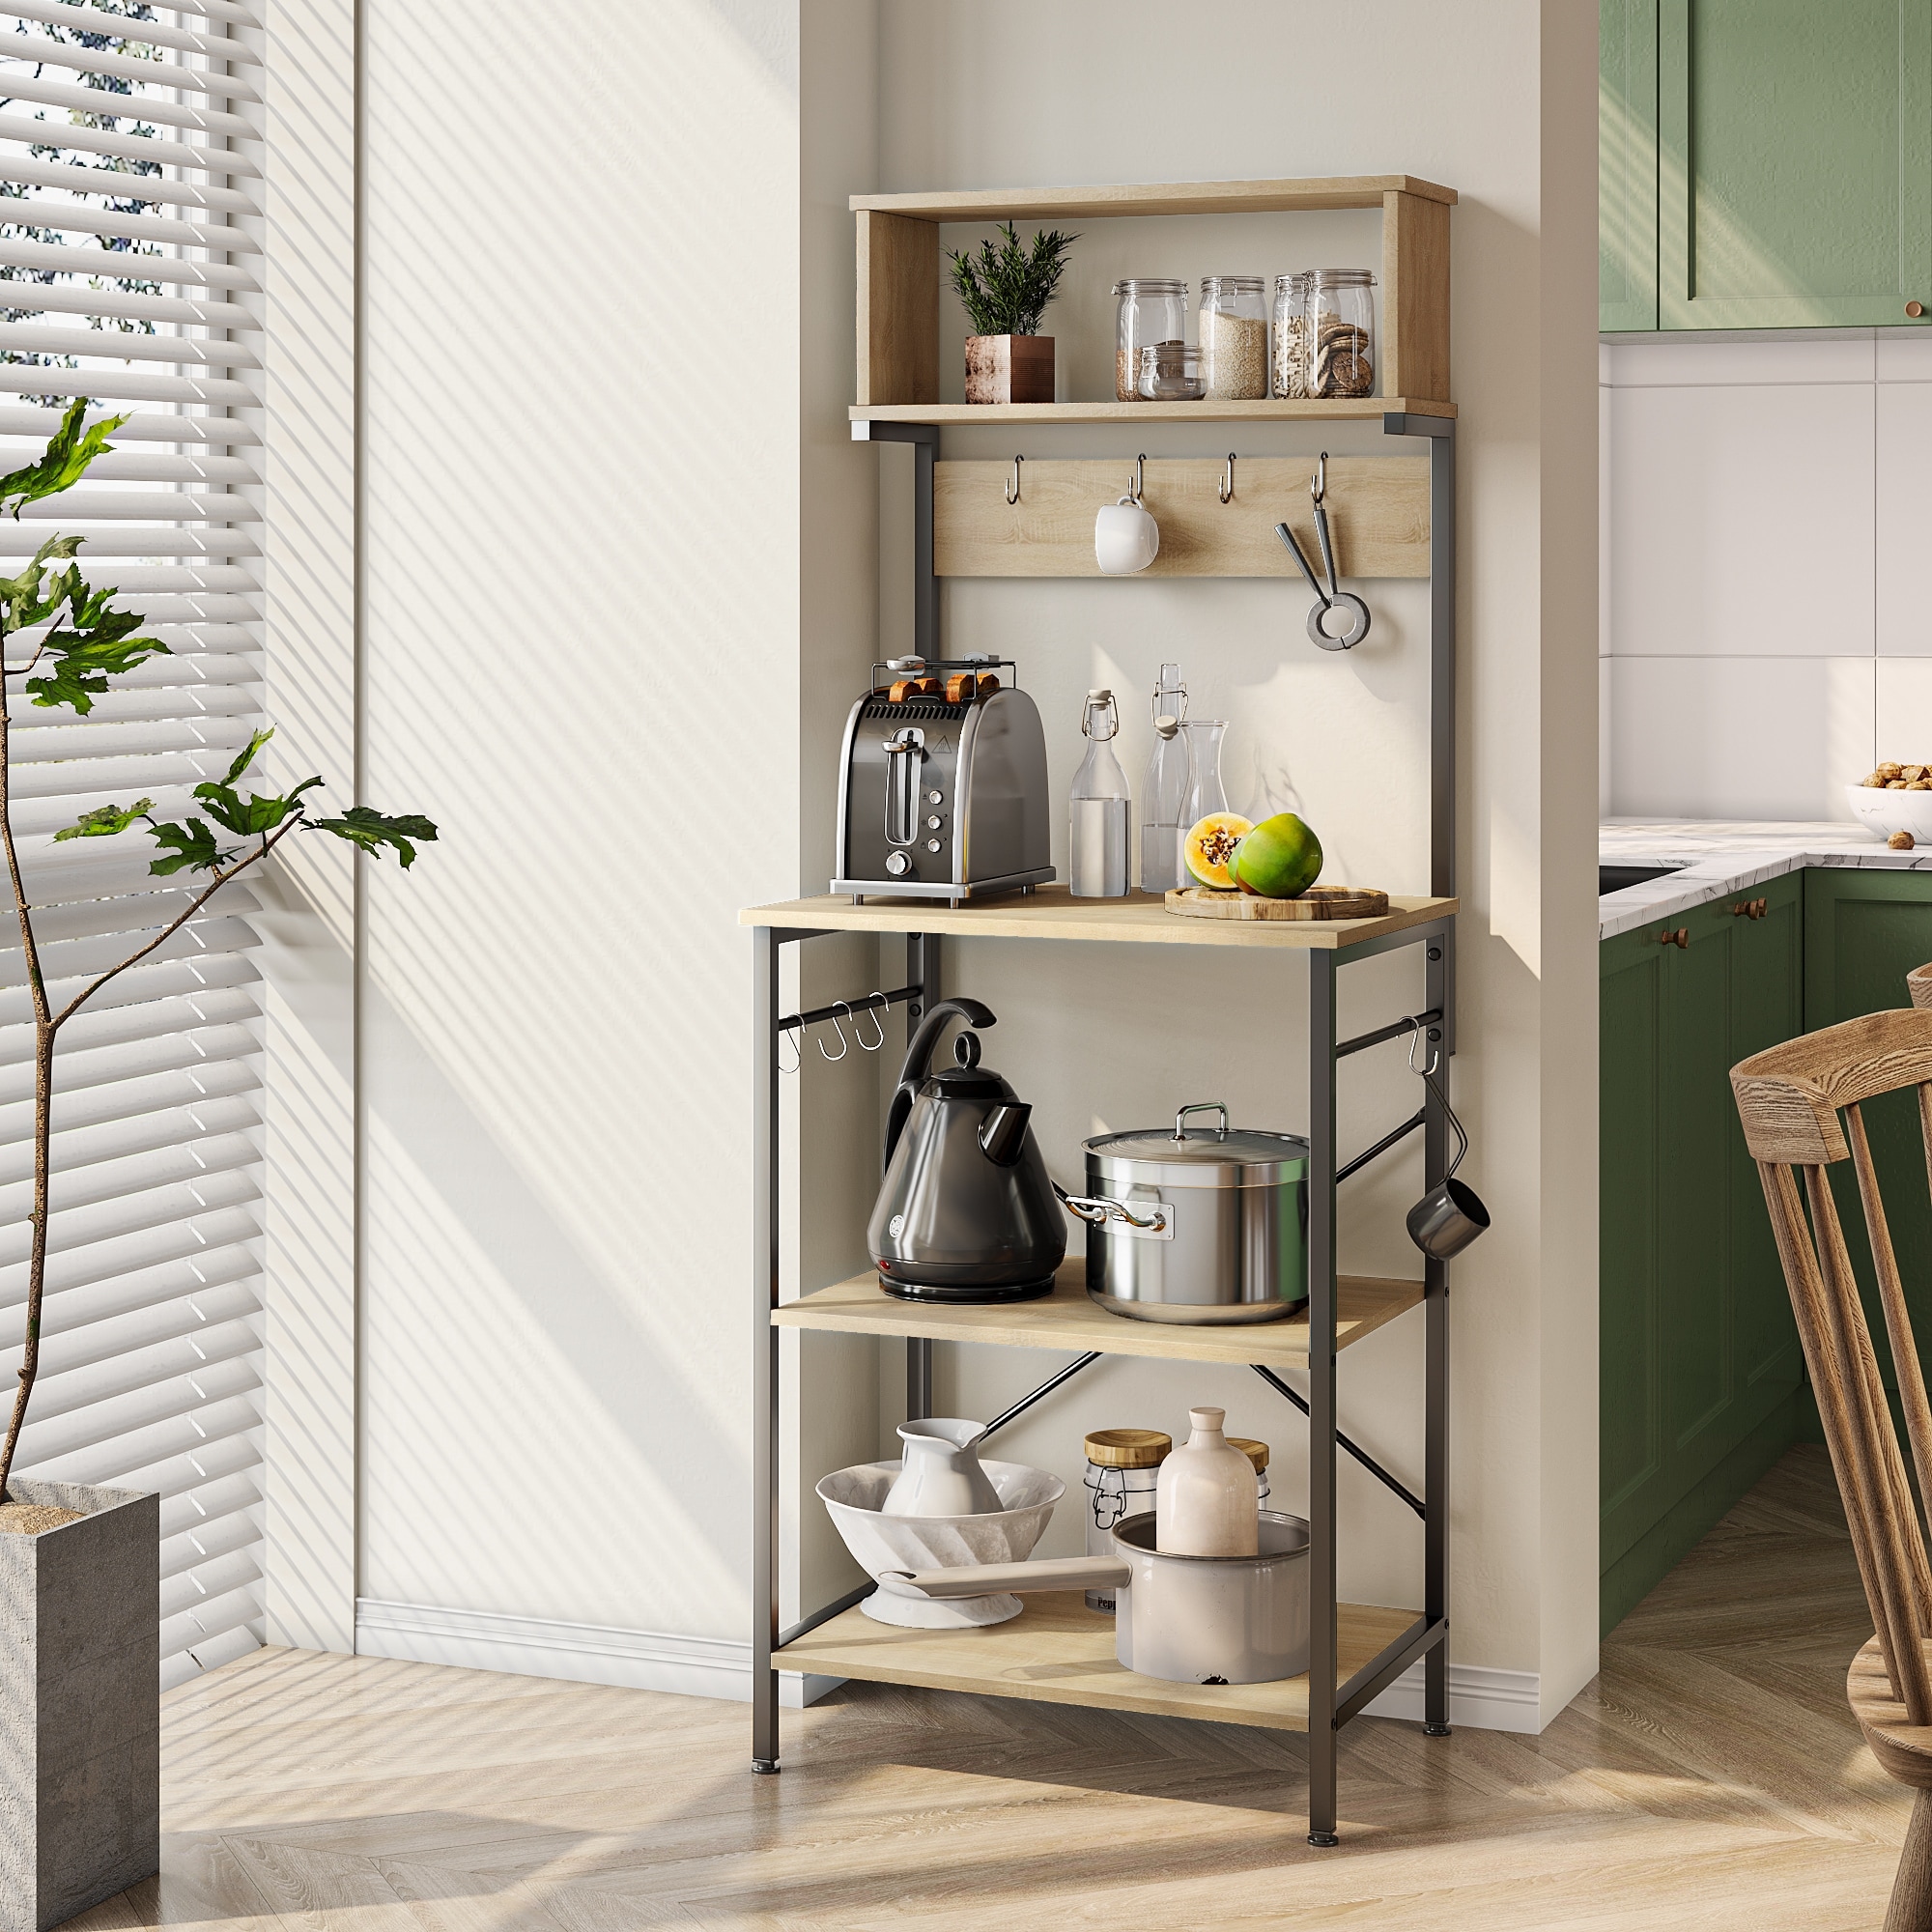 https://ak1.ostkcdn.com/images/products/is/images/direct/589bd1182c0daa7d1db3c8a4c4d08d310c6cf8b0/Bestier-Kitchen-Baker%27s-Rack-with-Hutch-8-Side-Hooks.jpg